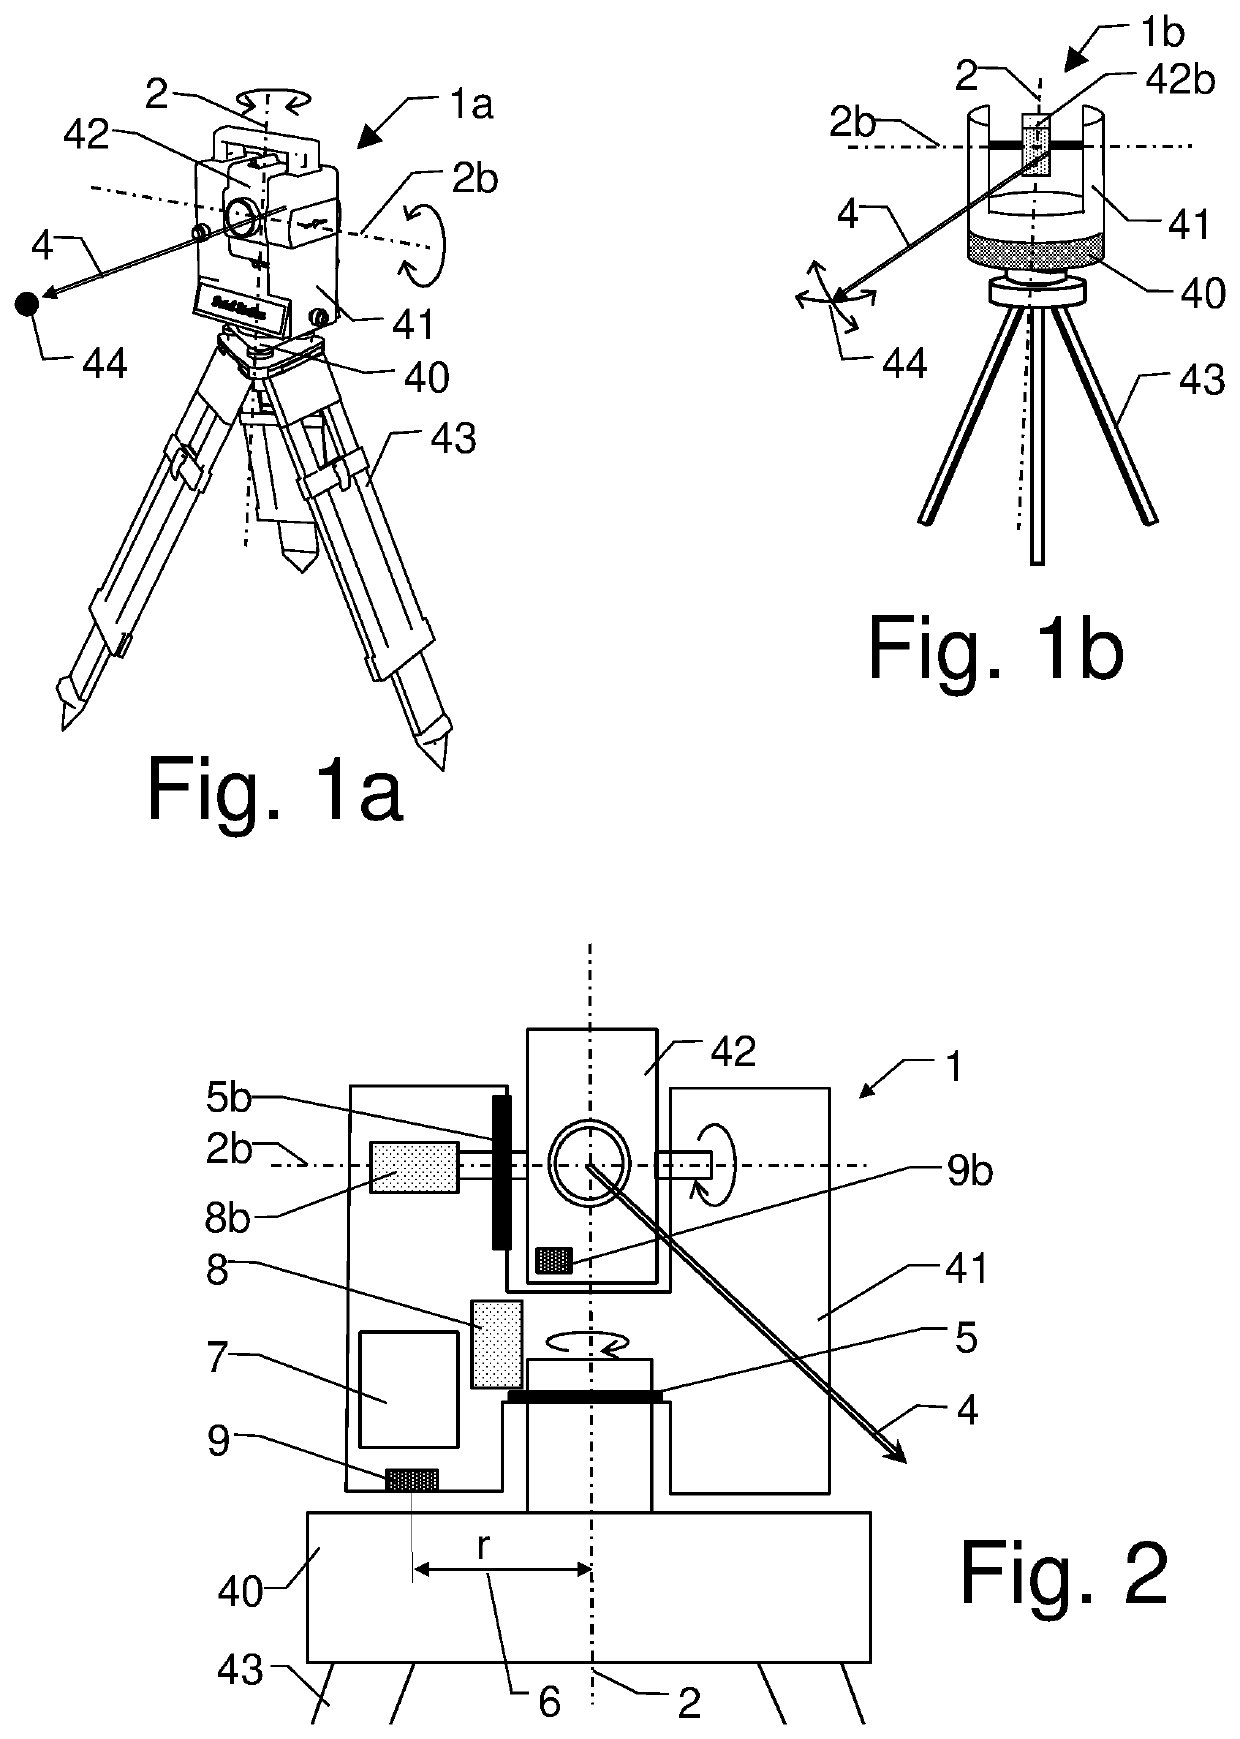 Online leveling calibration of a geodetic instrument